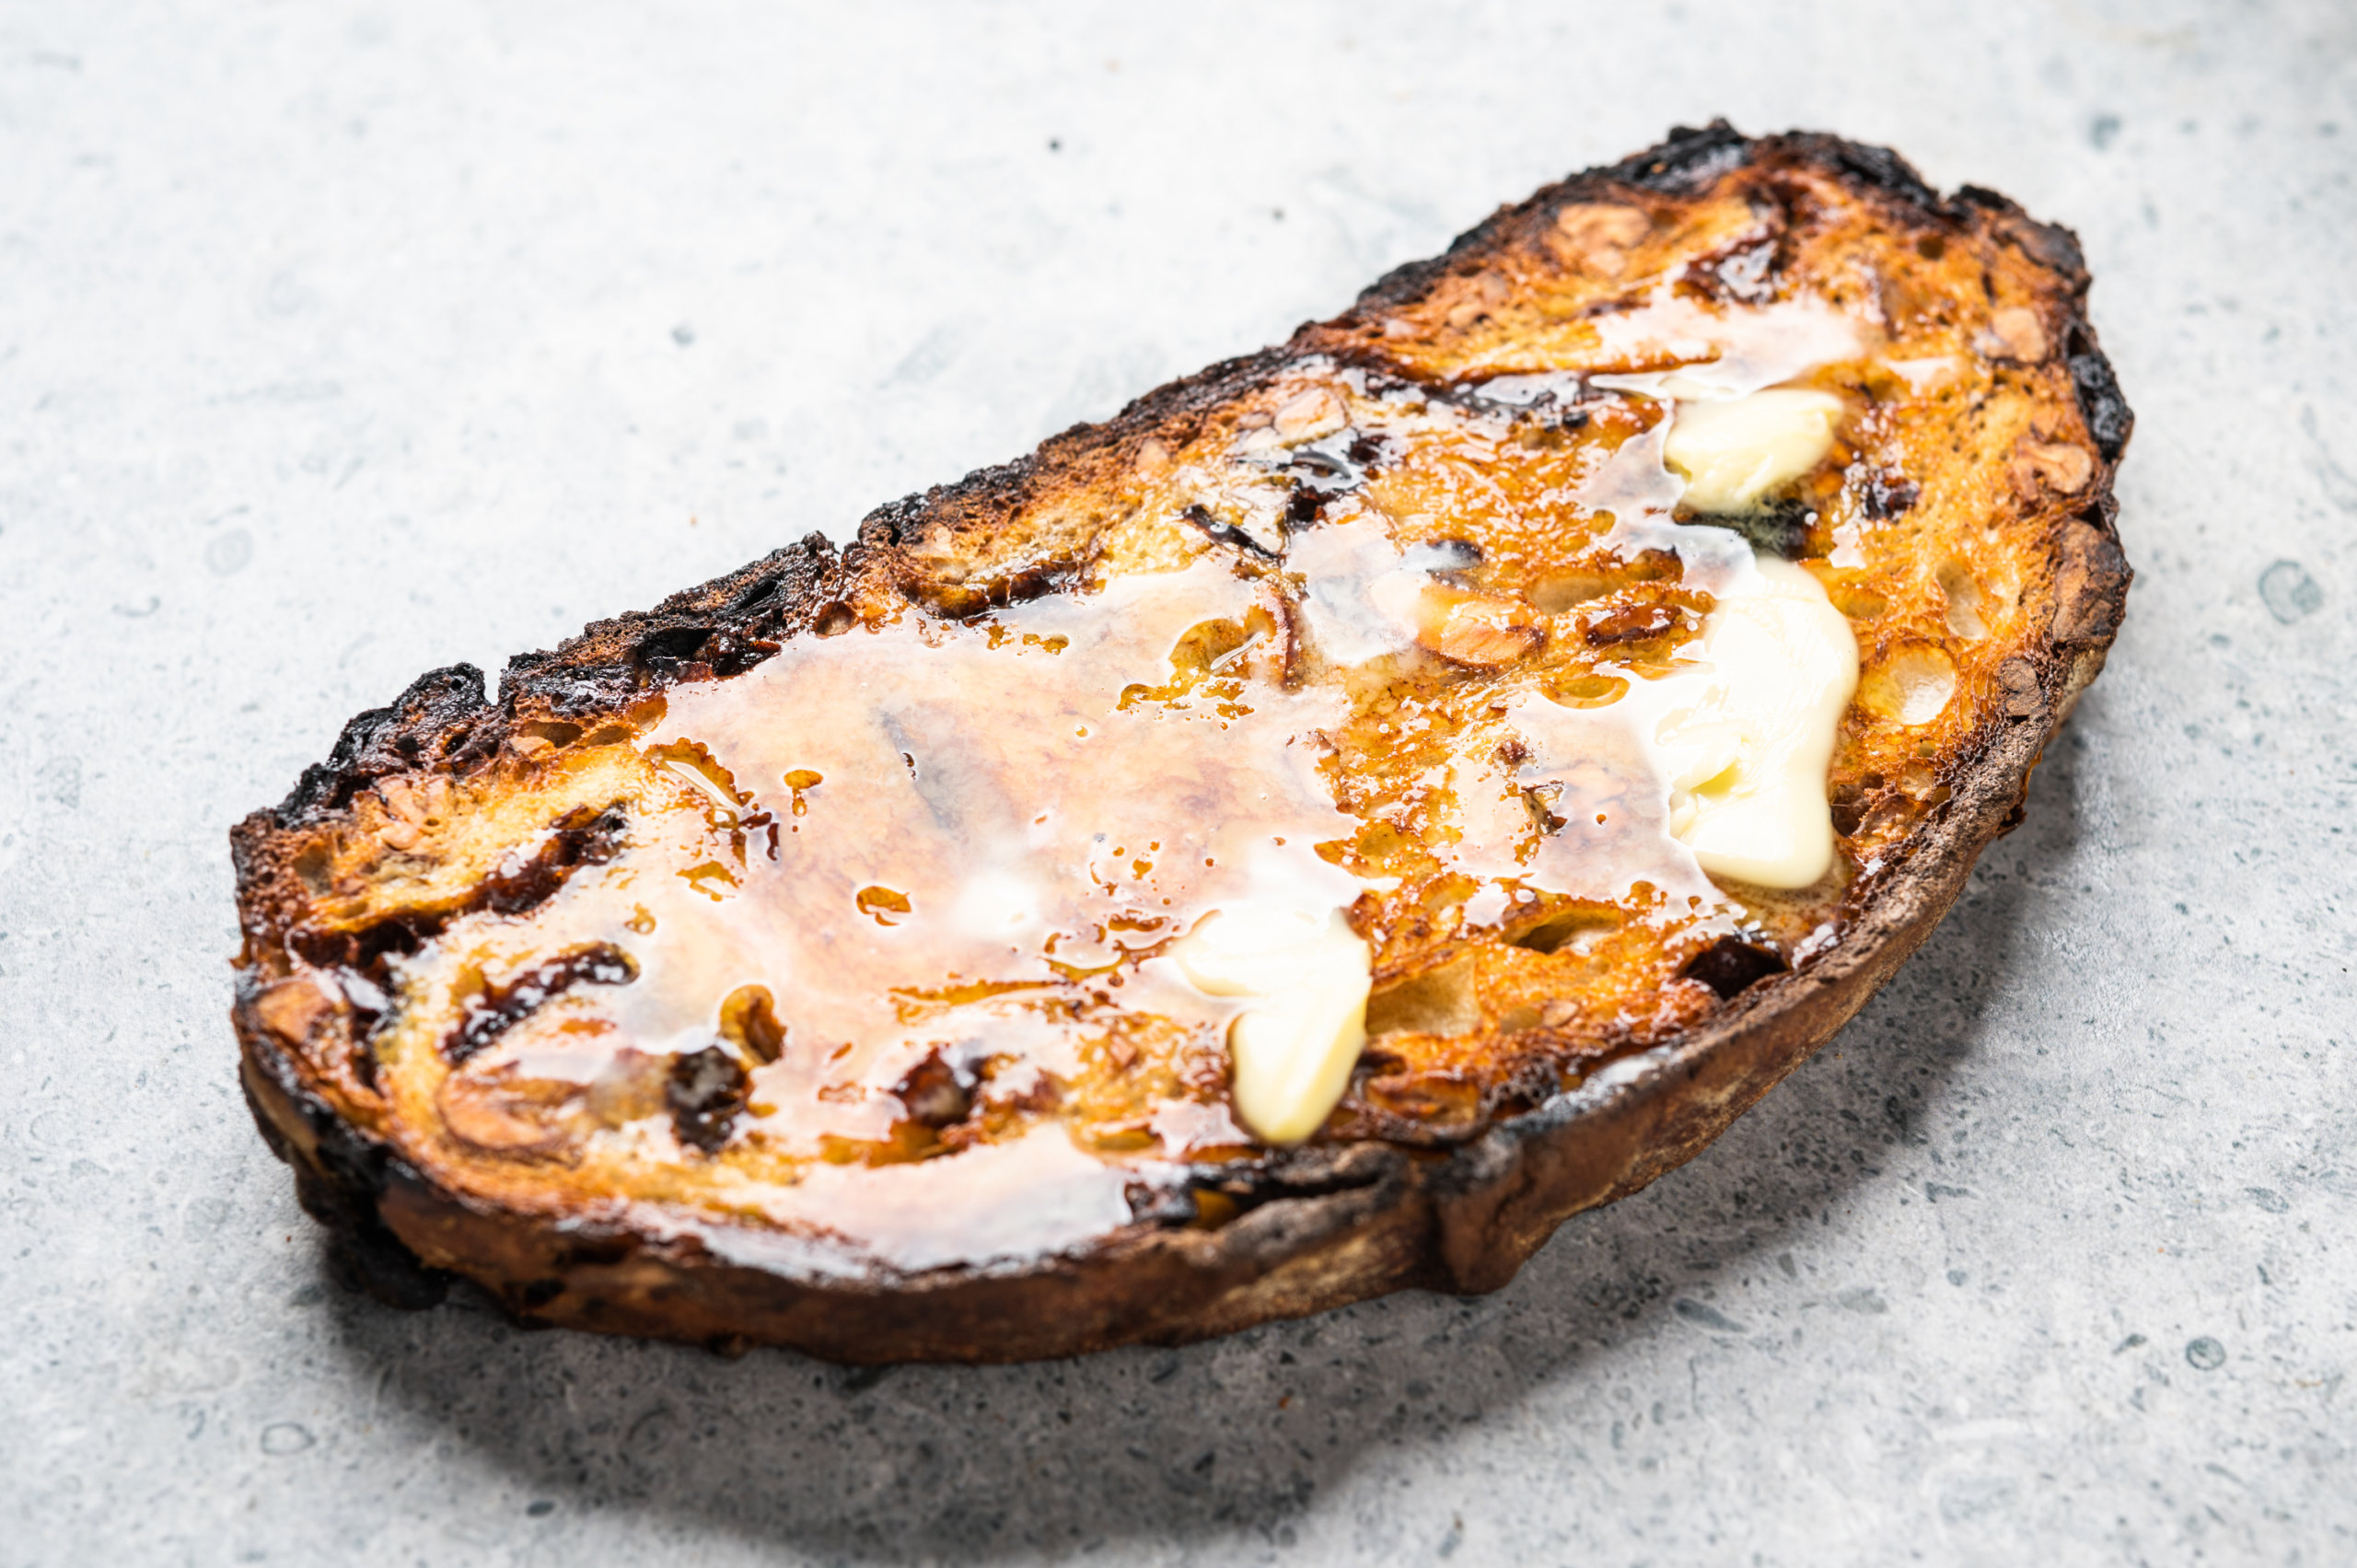 Butter melting on toasted prune and cardamom bread